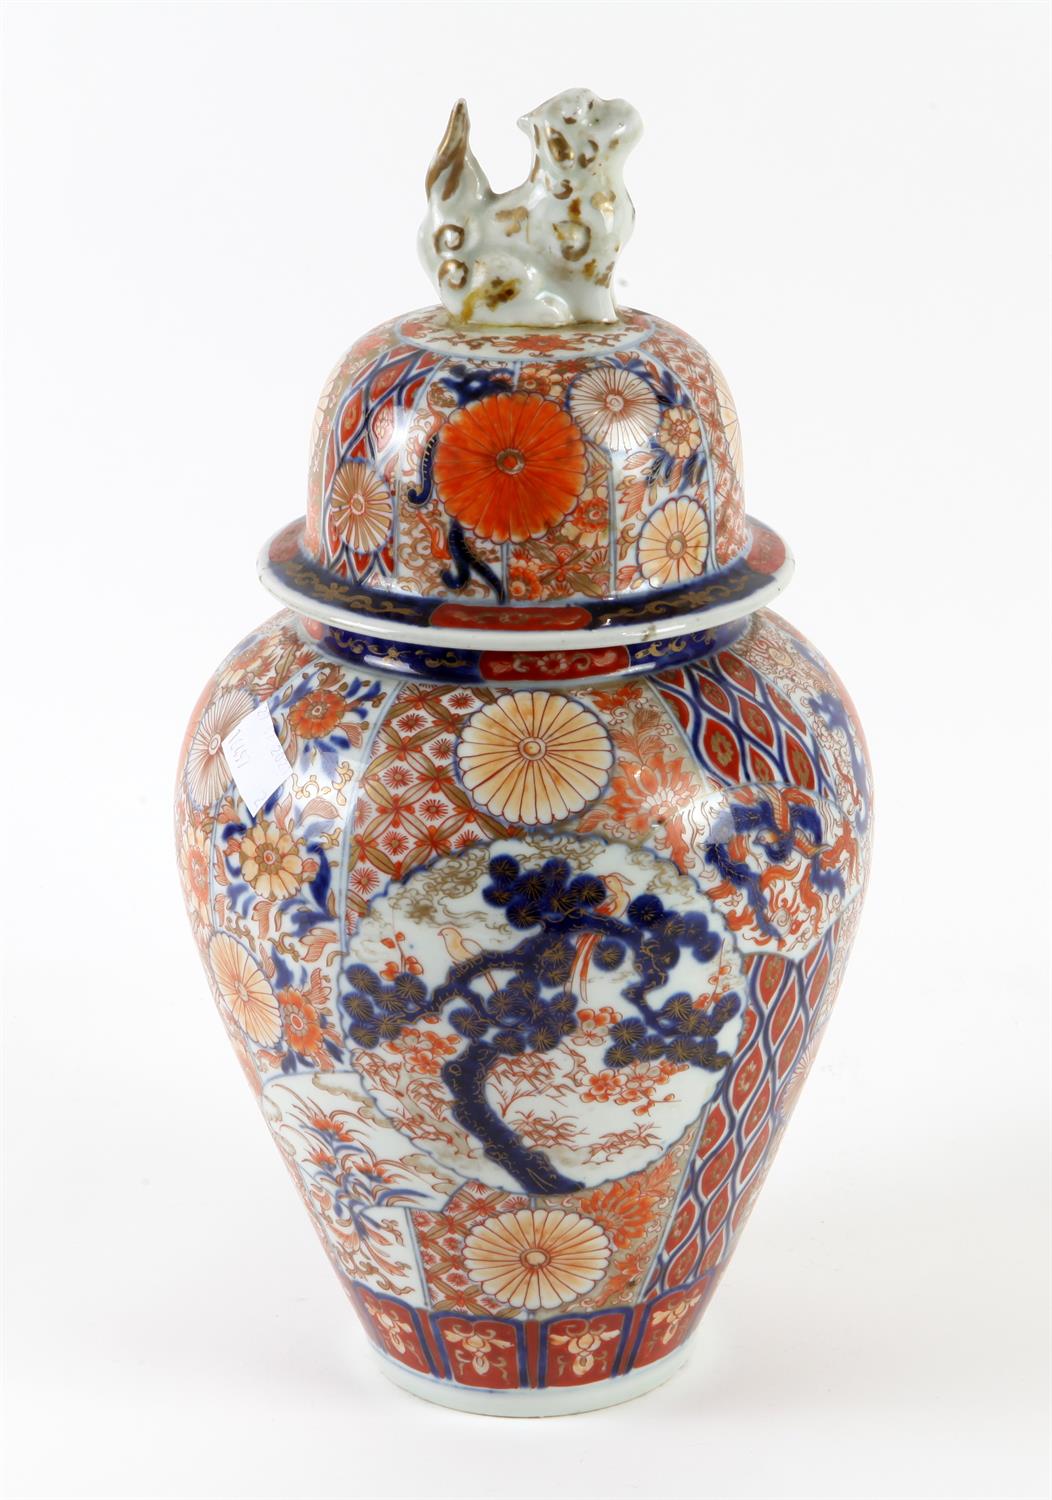 Arita (Imari) baluster vase with cover Meiji period typically decorated in underglaze blue and iron - Image 2 of 3